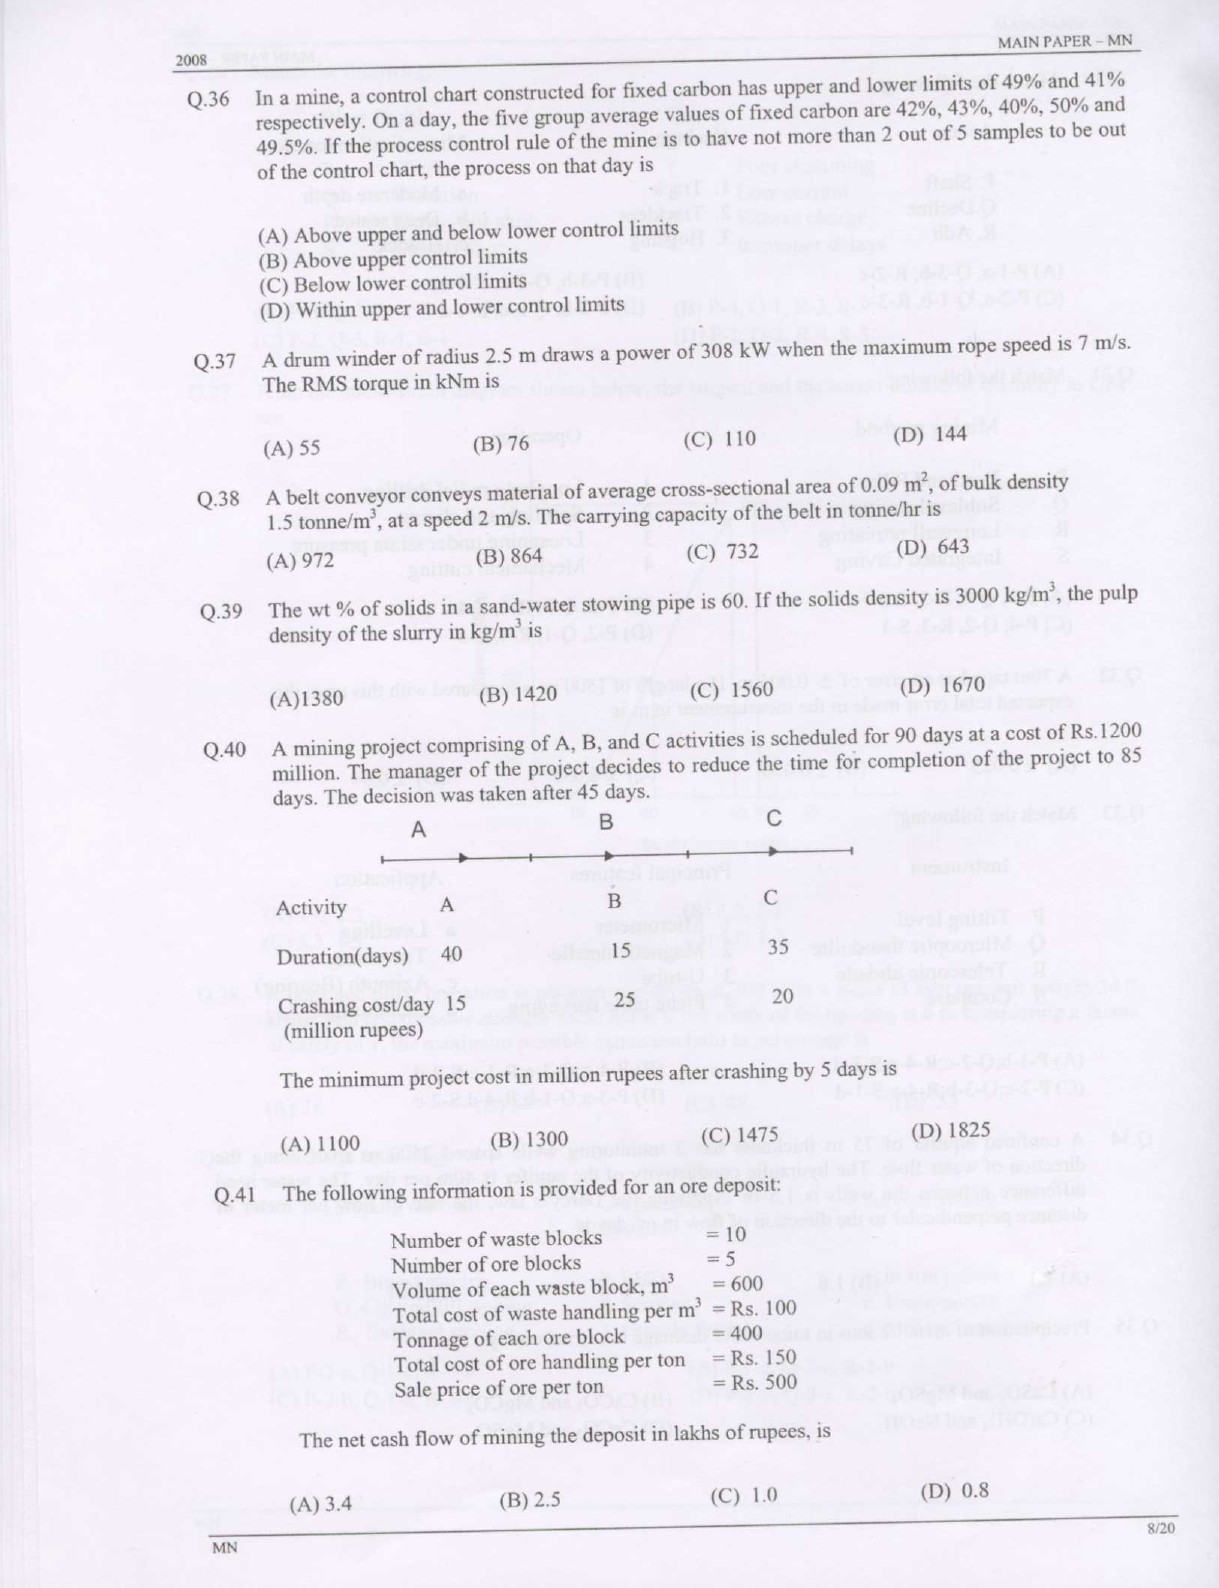 GATE Exam Question Paper 2008 Mining Engineering 8